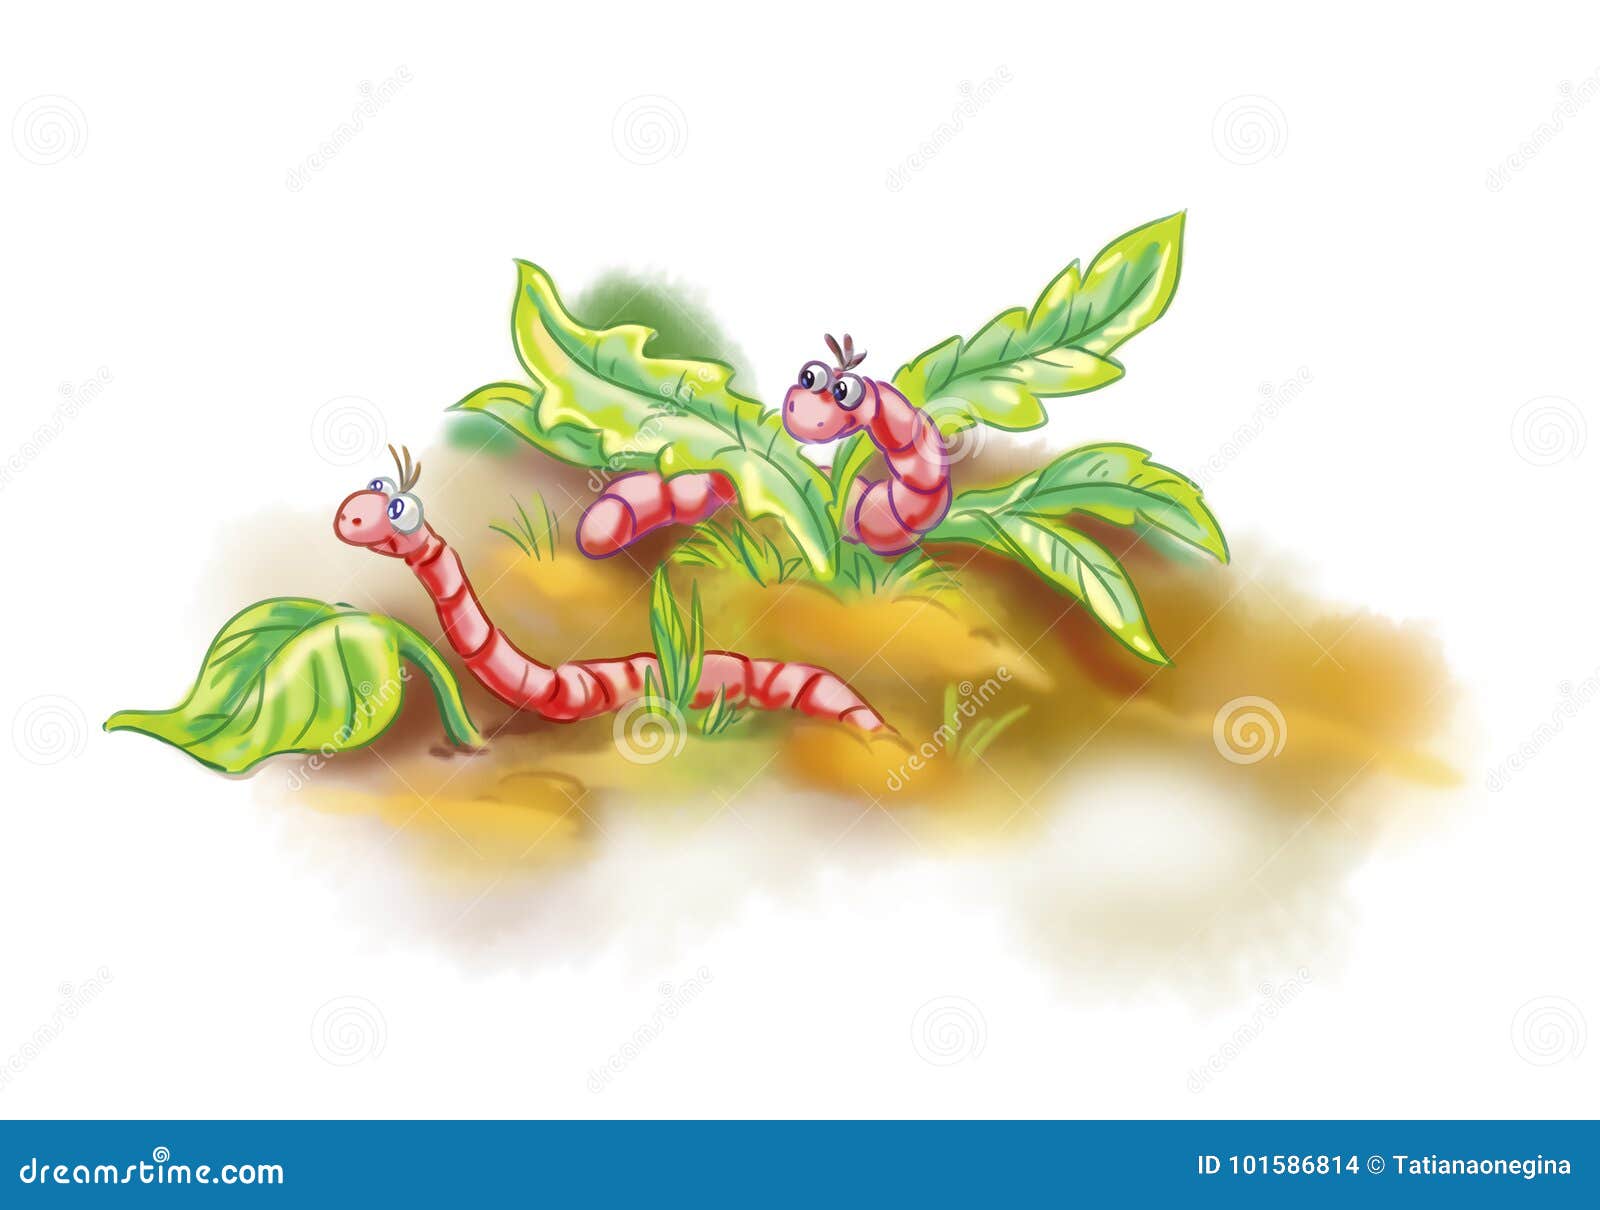 Earth Worms Illustrations & Vectors